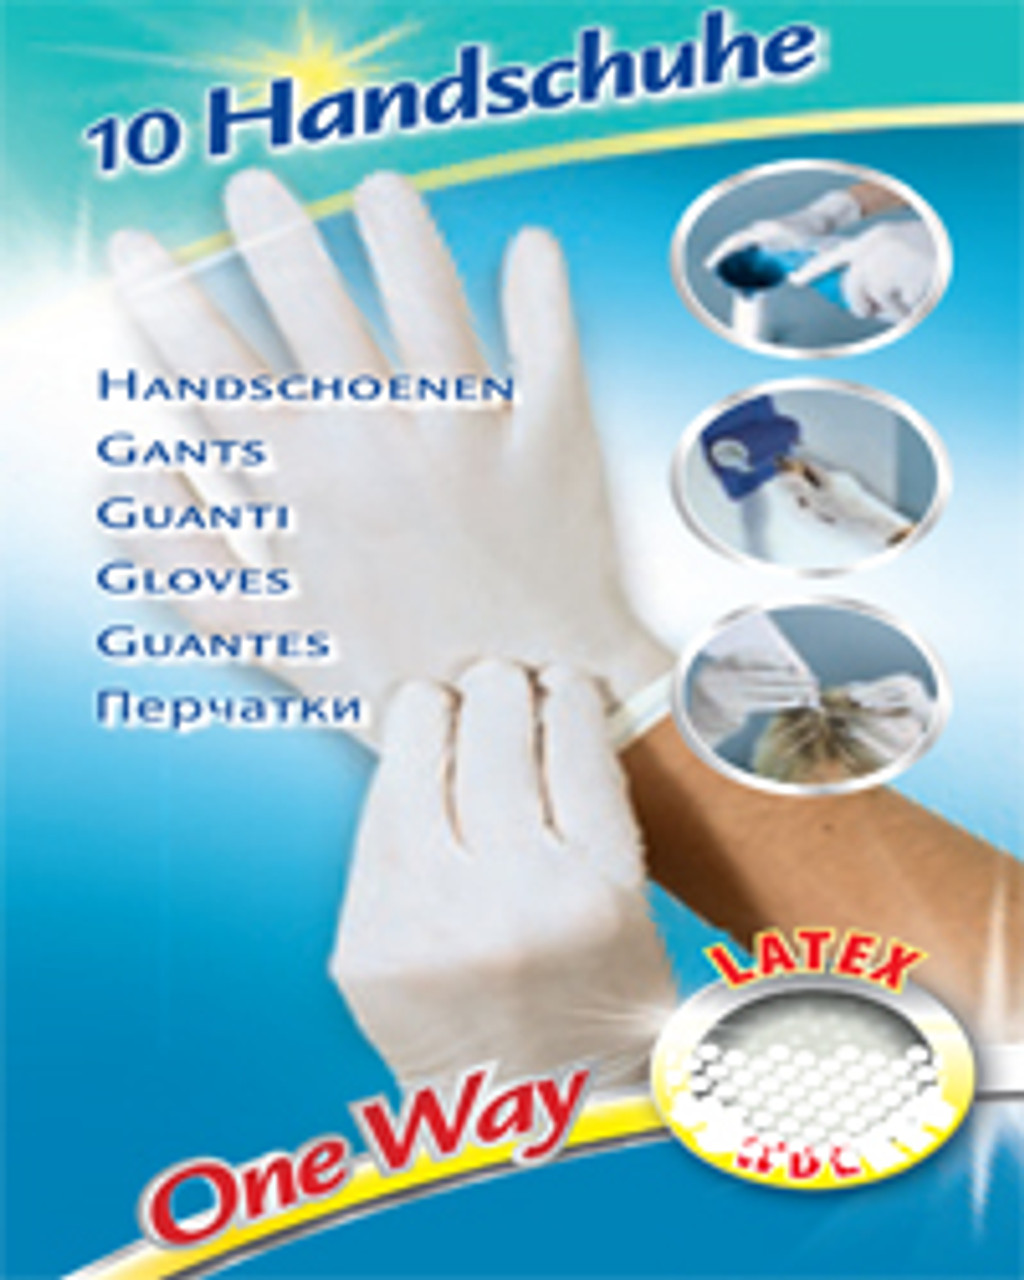 Leifheit Single Use Powdered Latex Gloves Pack of 10 - Laundry Company